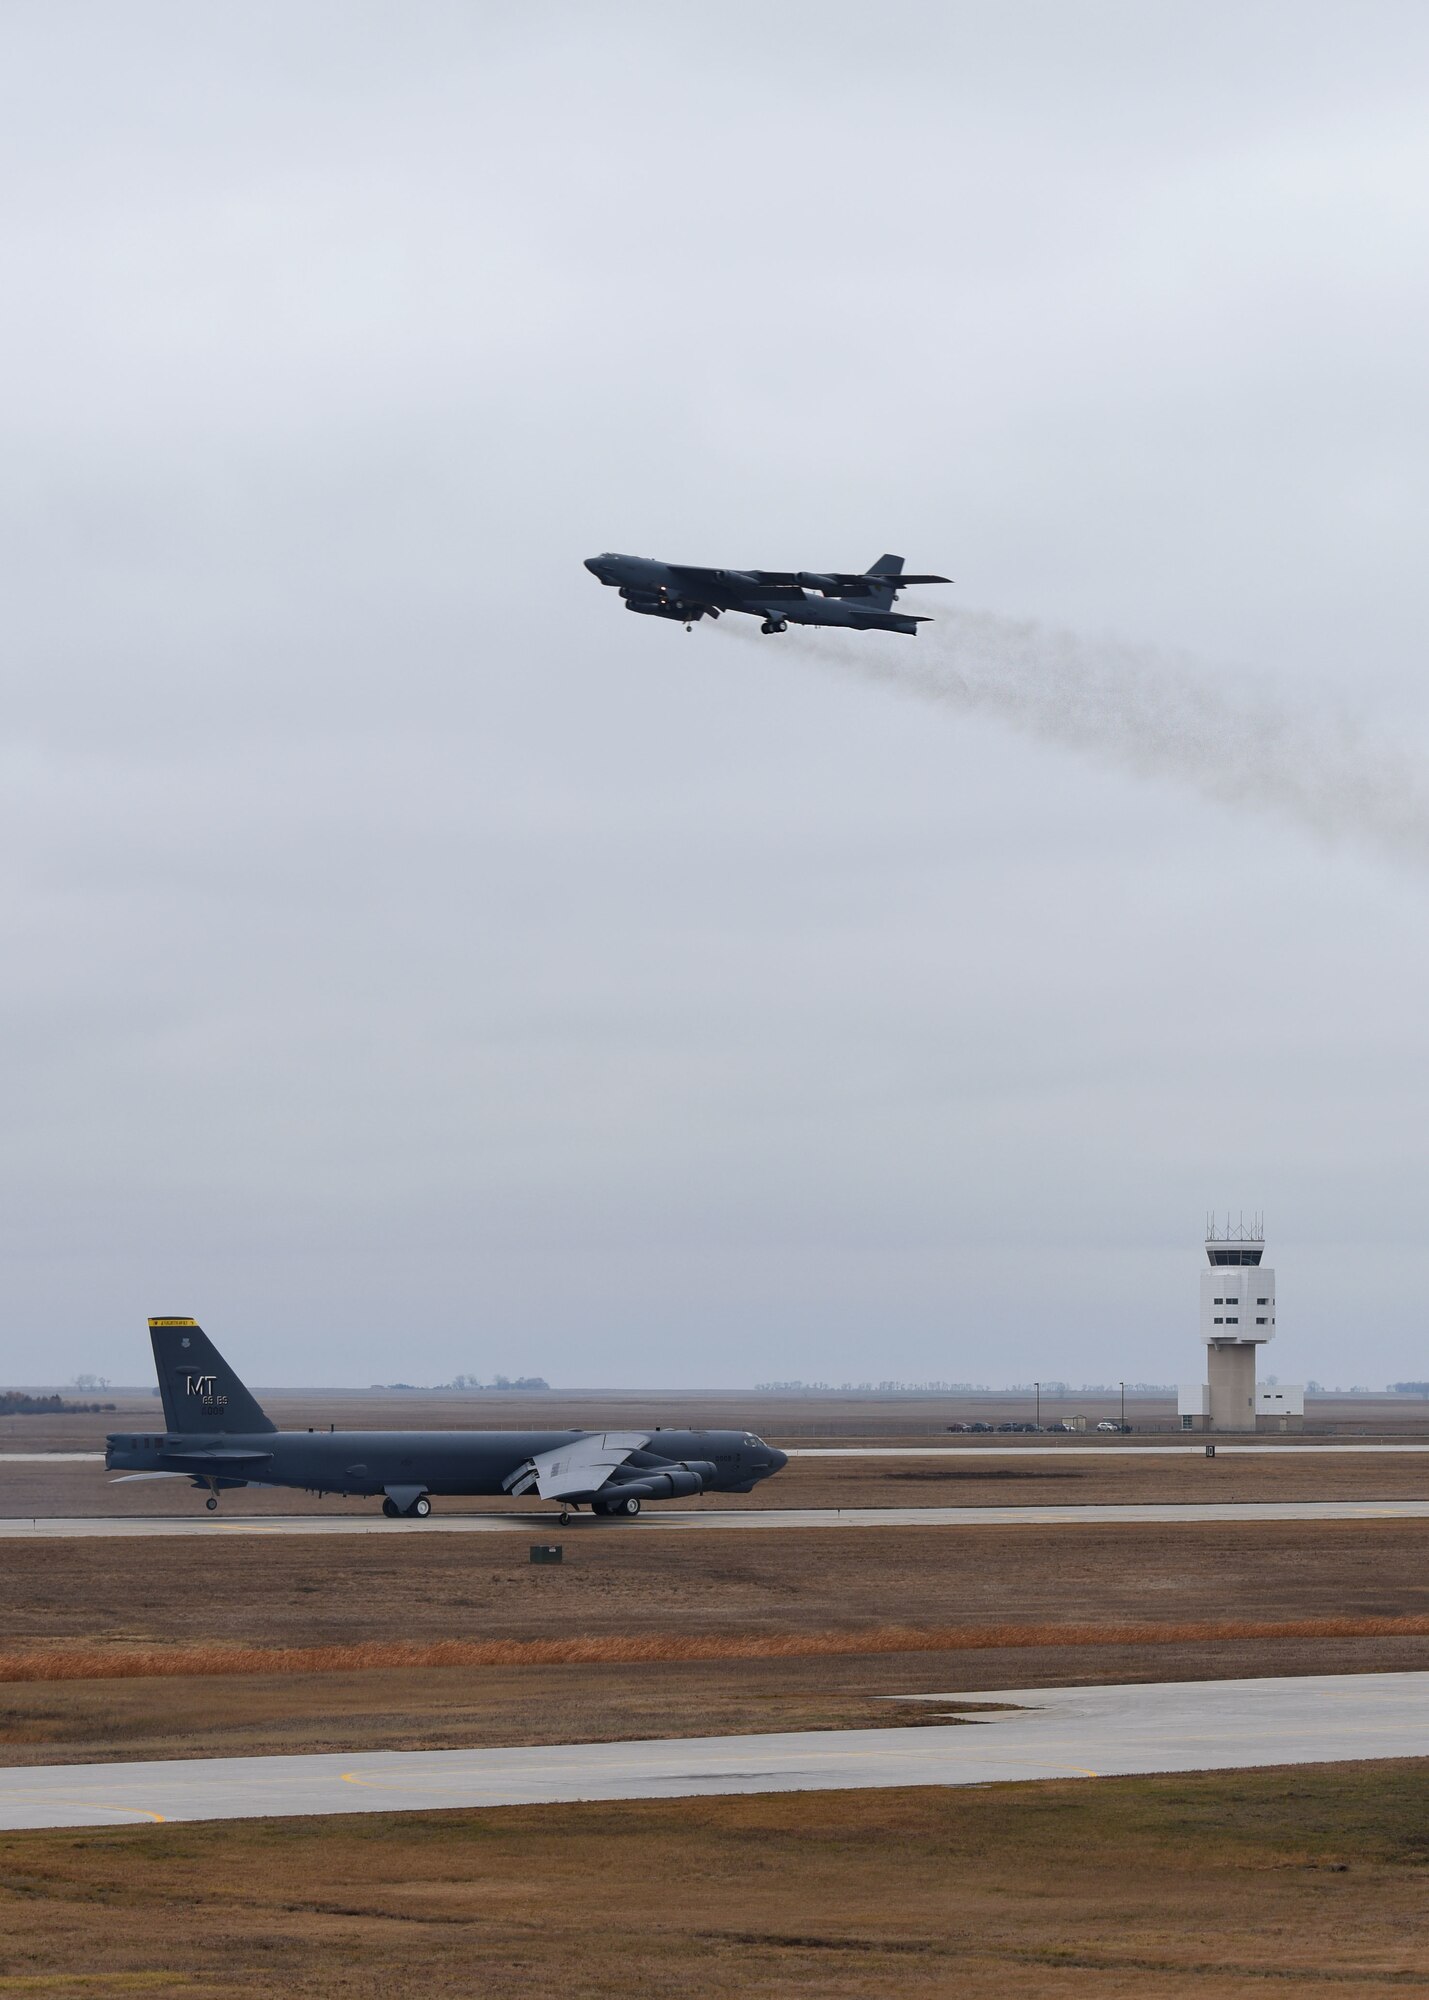 Two B-52H Stratofortresses pass each other during Global Thunder 19 at Minot Air Force Base, N.D., Nov. 4, 2018. Global Thunder is an annual U.S. Strategic Command (USSTRATCOM) exercise designed to provide training opportunities to test and validate command, control and operational procedures. The training is based on a notional scenario developed to drive execution of USSTRATCOM and component forces'; ability to support the geographic combatant commands, deter adversaries and, if necessary, employ forces as directed by the President of the United States. (U.S. Air Force Photo by Airman 1st Class Dillon J. Audit)